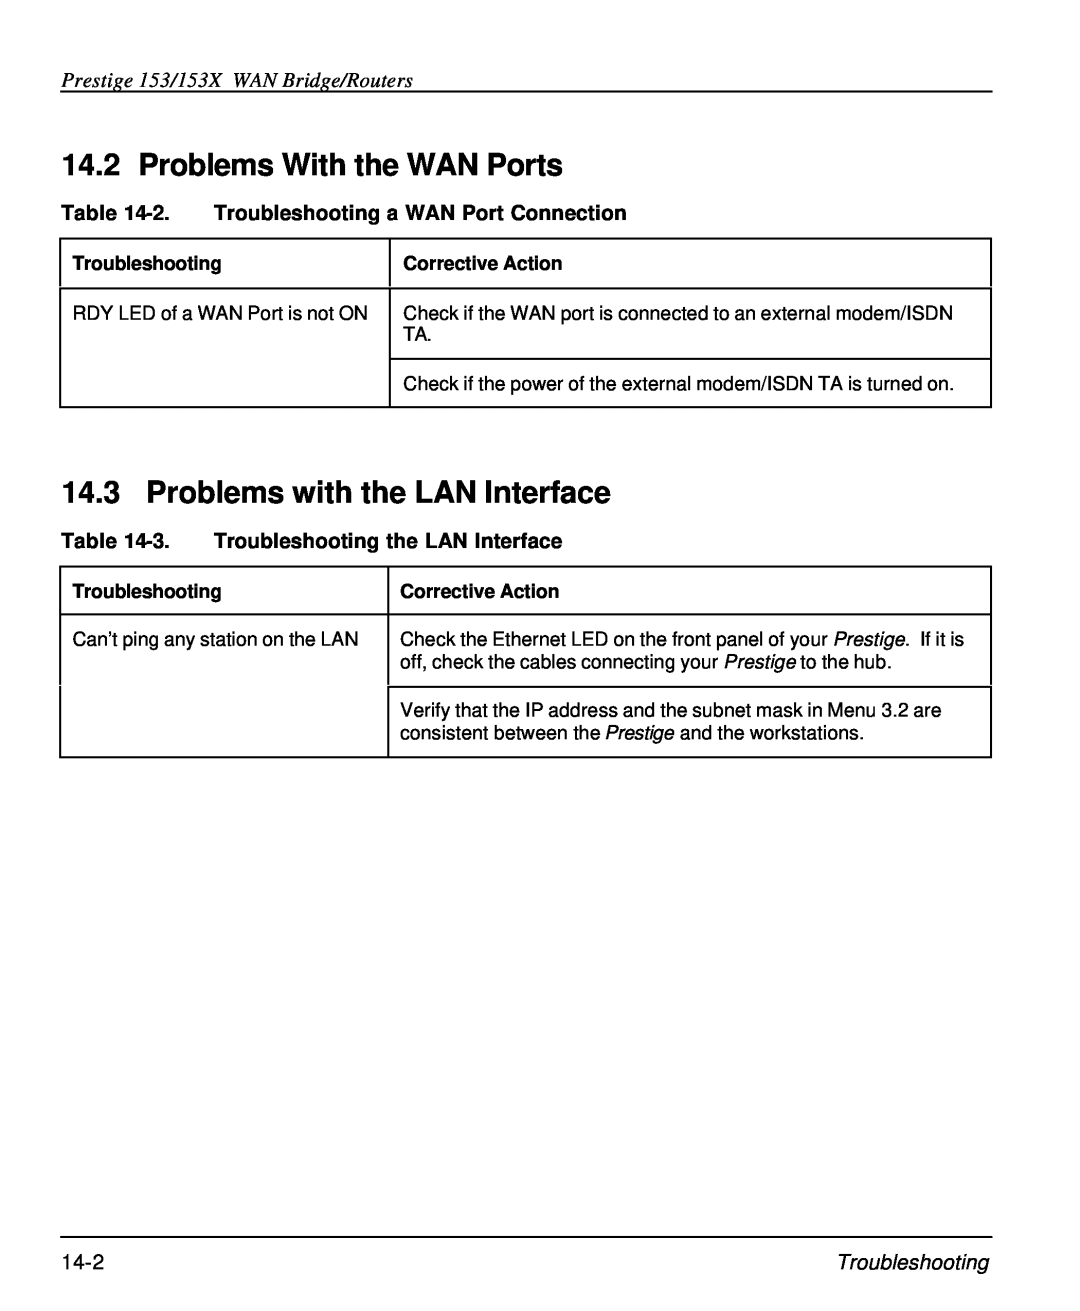 ZyXEL Communications 153 Problems With the WAN Ports, Problems with the LAN Interface, Troubleshooting the LAN Interface 